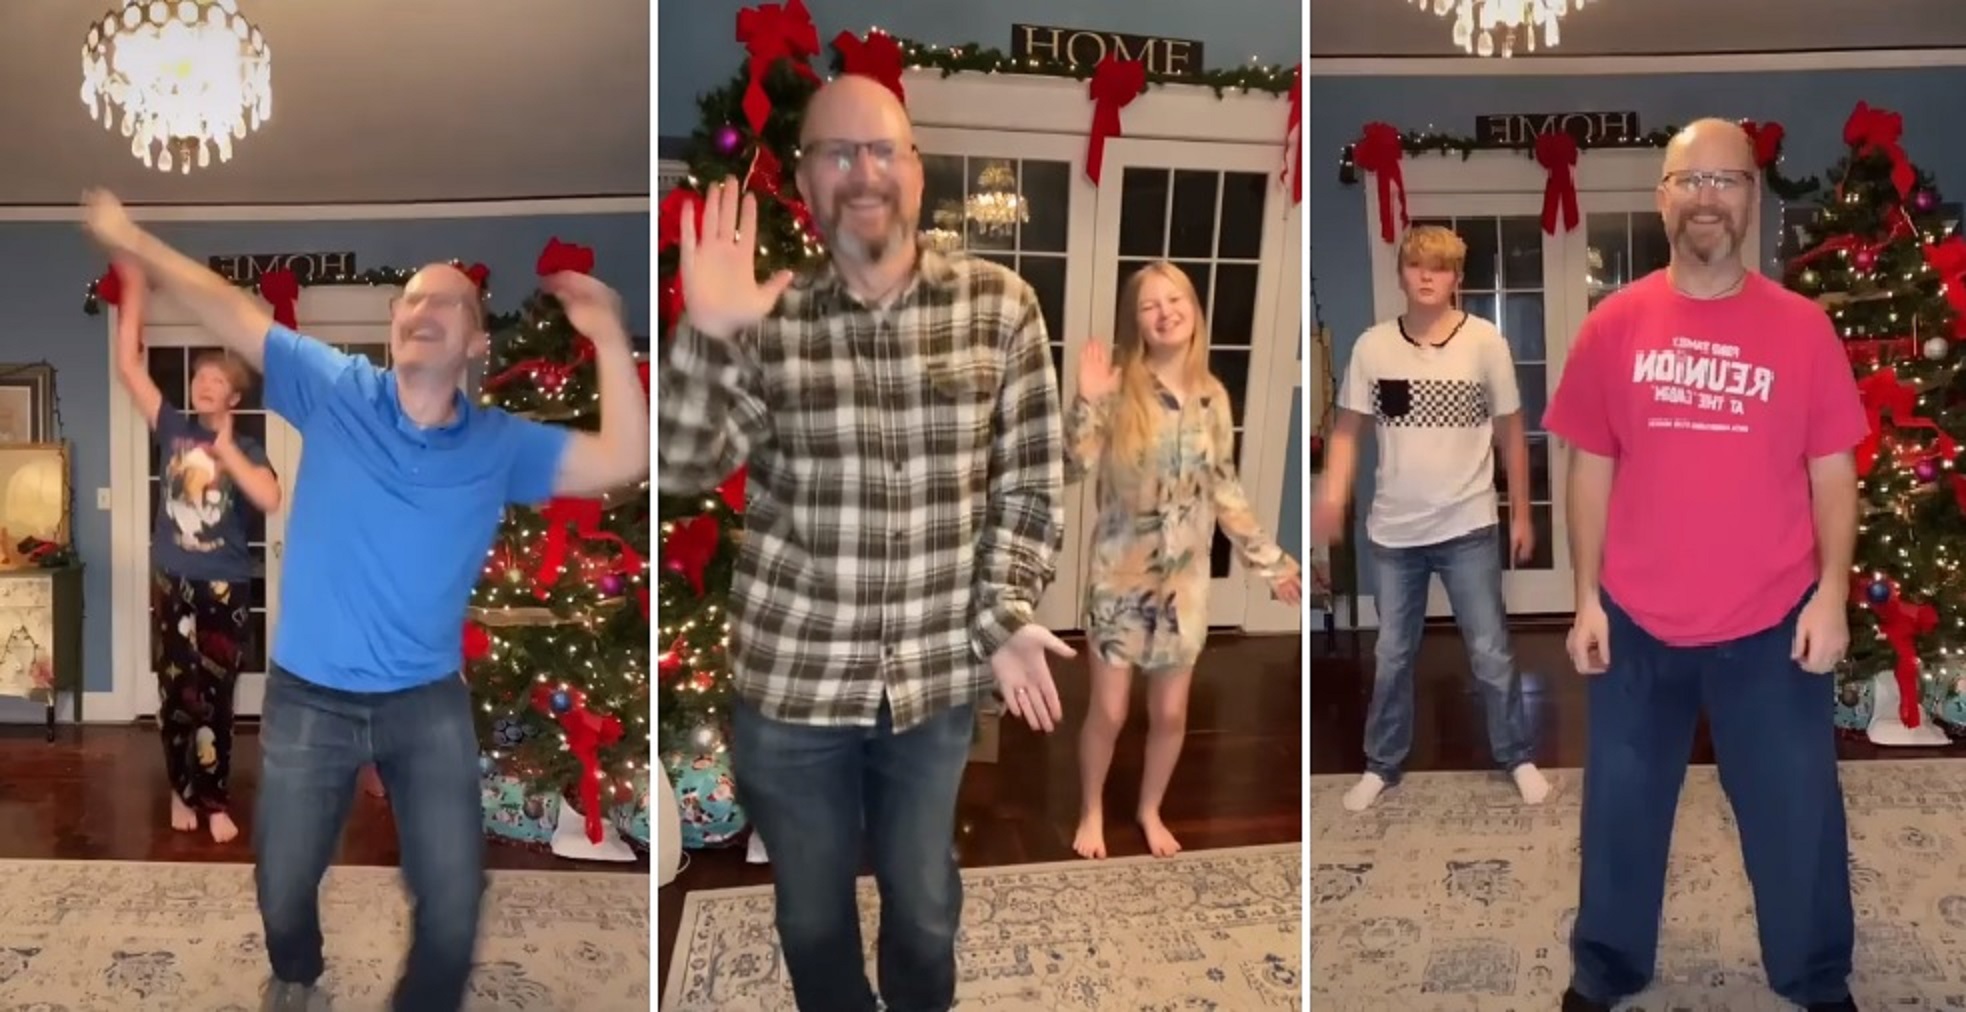 American Dad Dances To Bollywood Songs With His Kids and Goes Viral on Instagram [Videos]